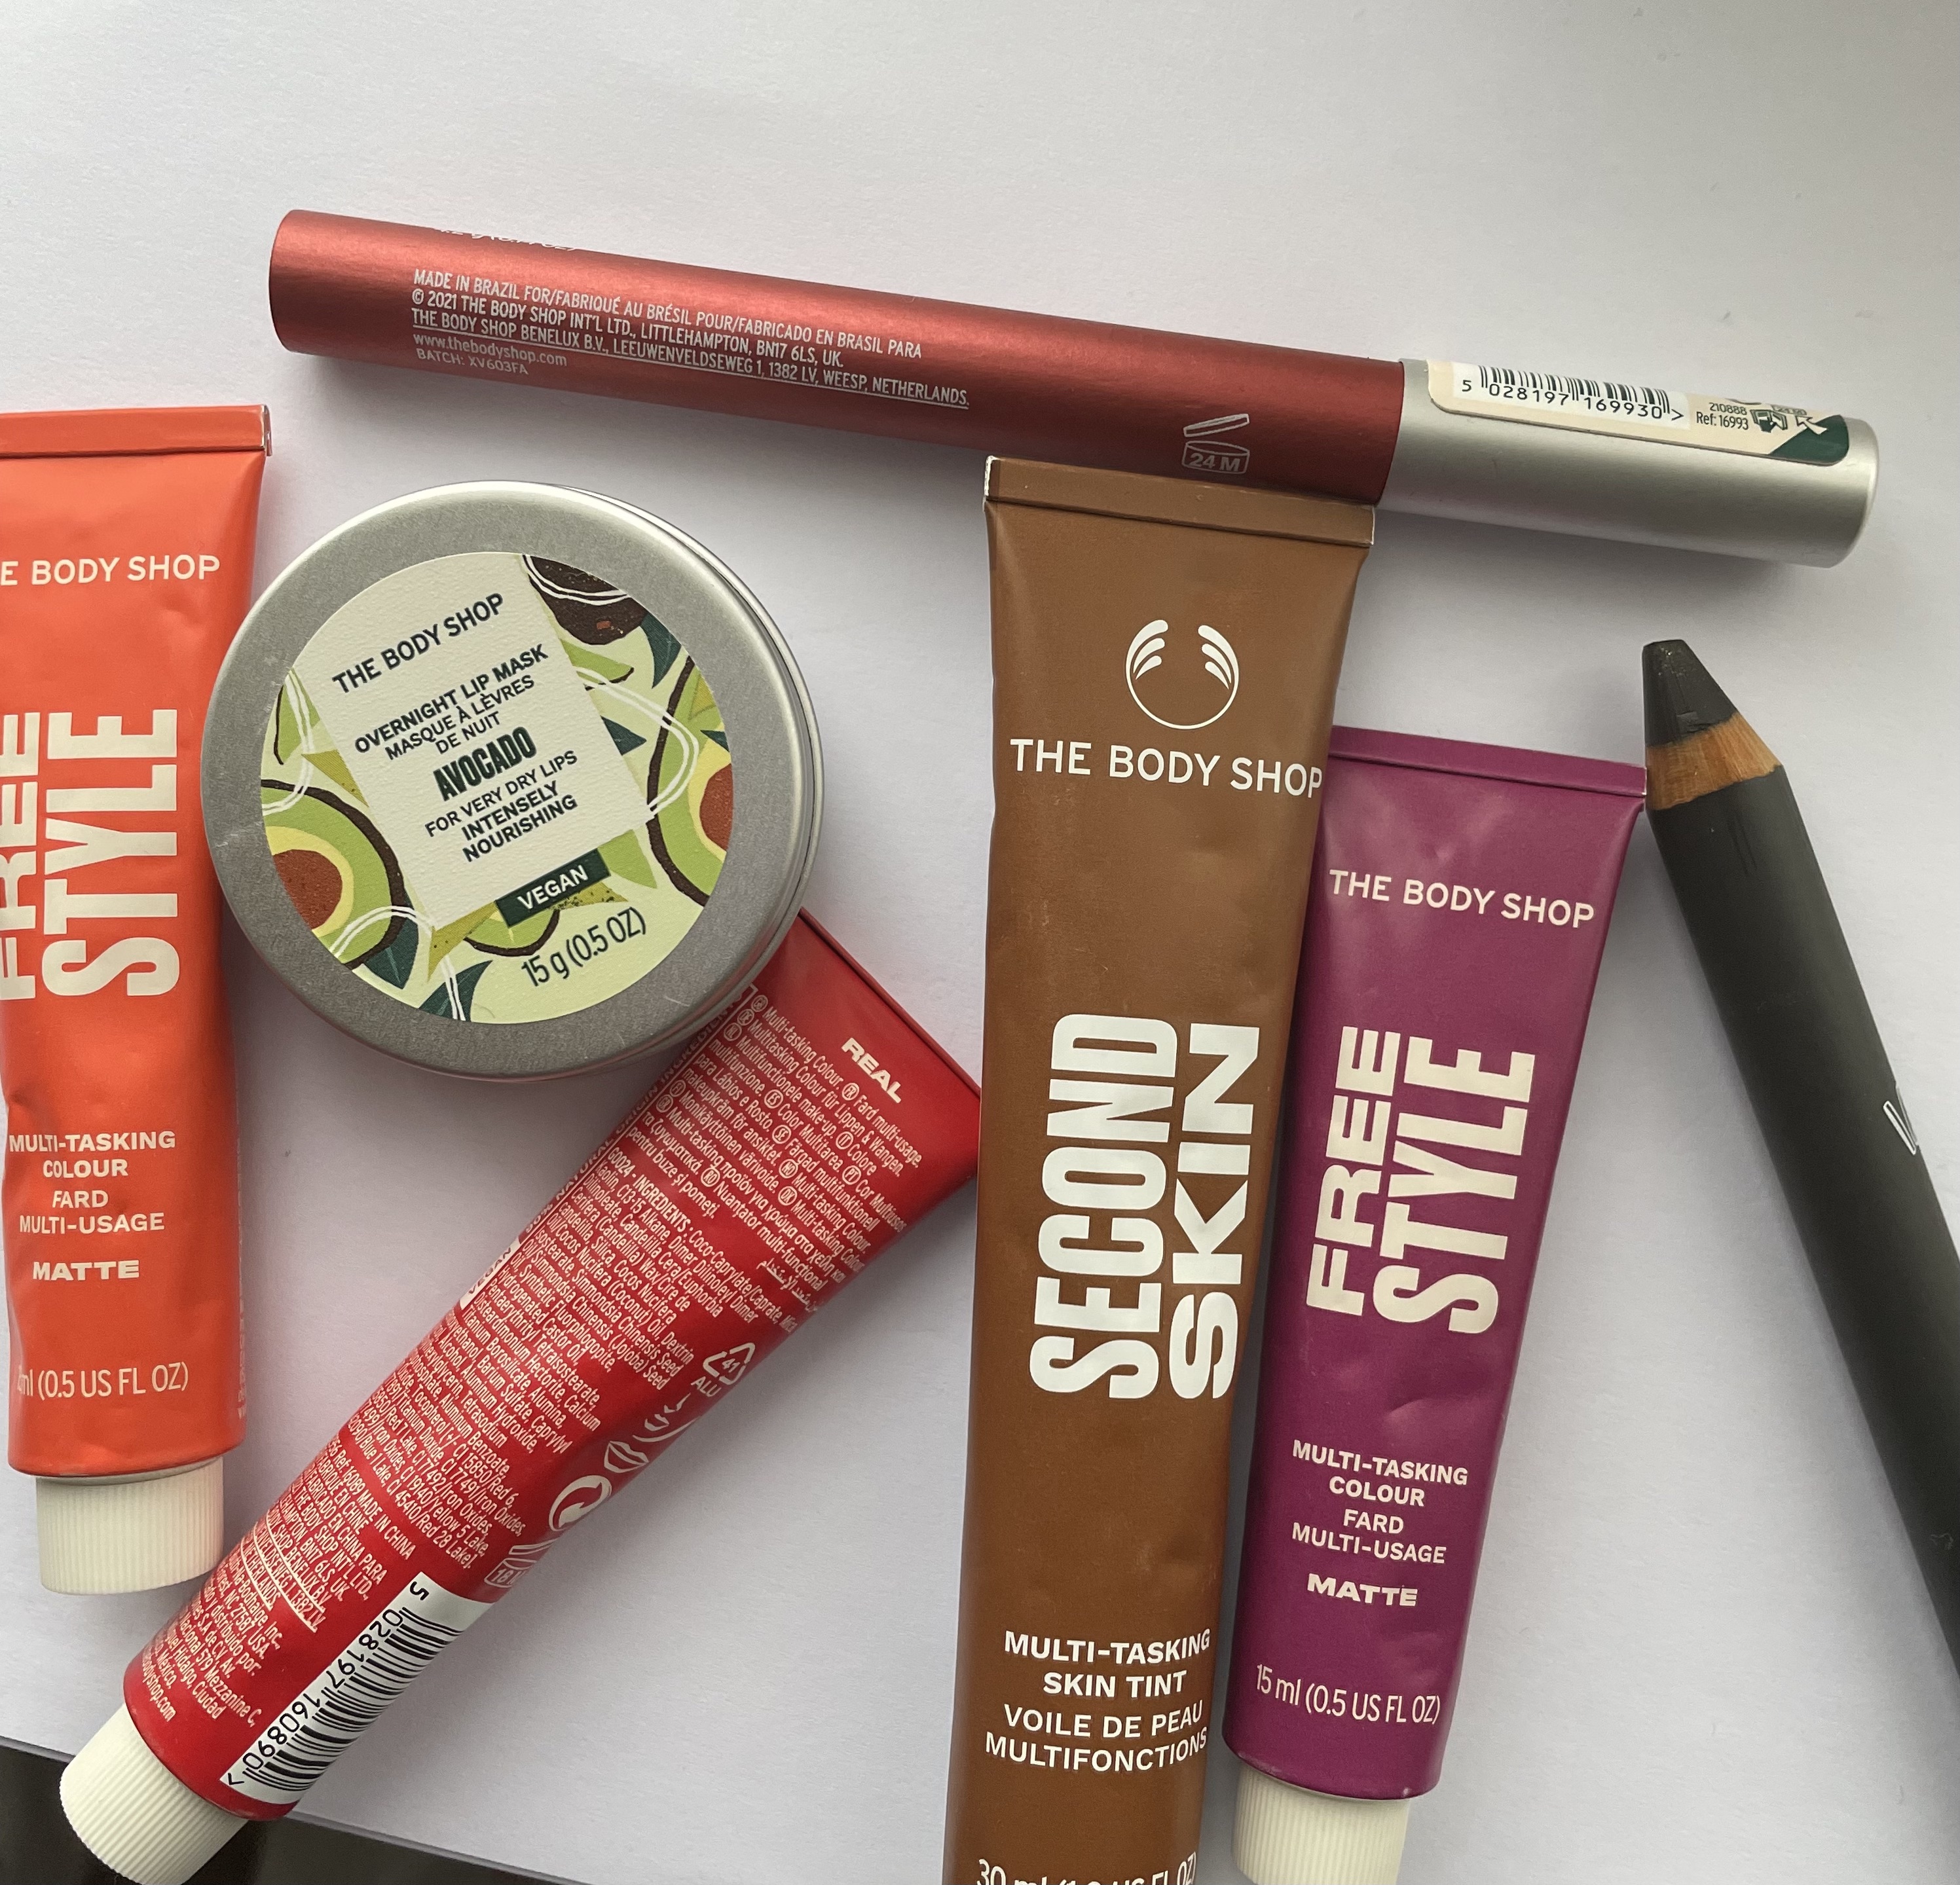 The Body Shop Makeup Review: A Beauty Ed's Honest Thoughts